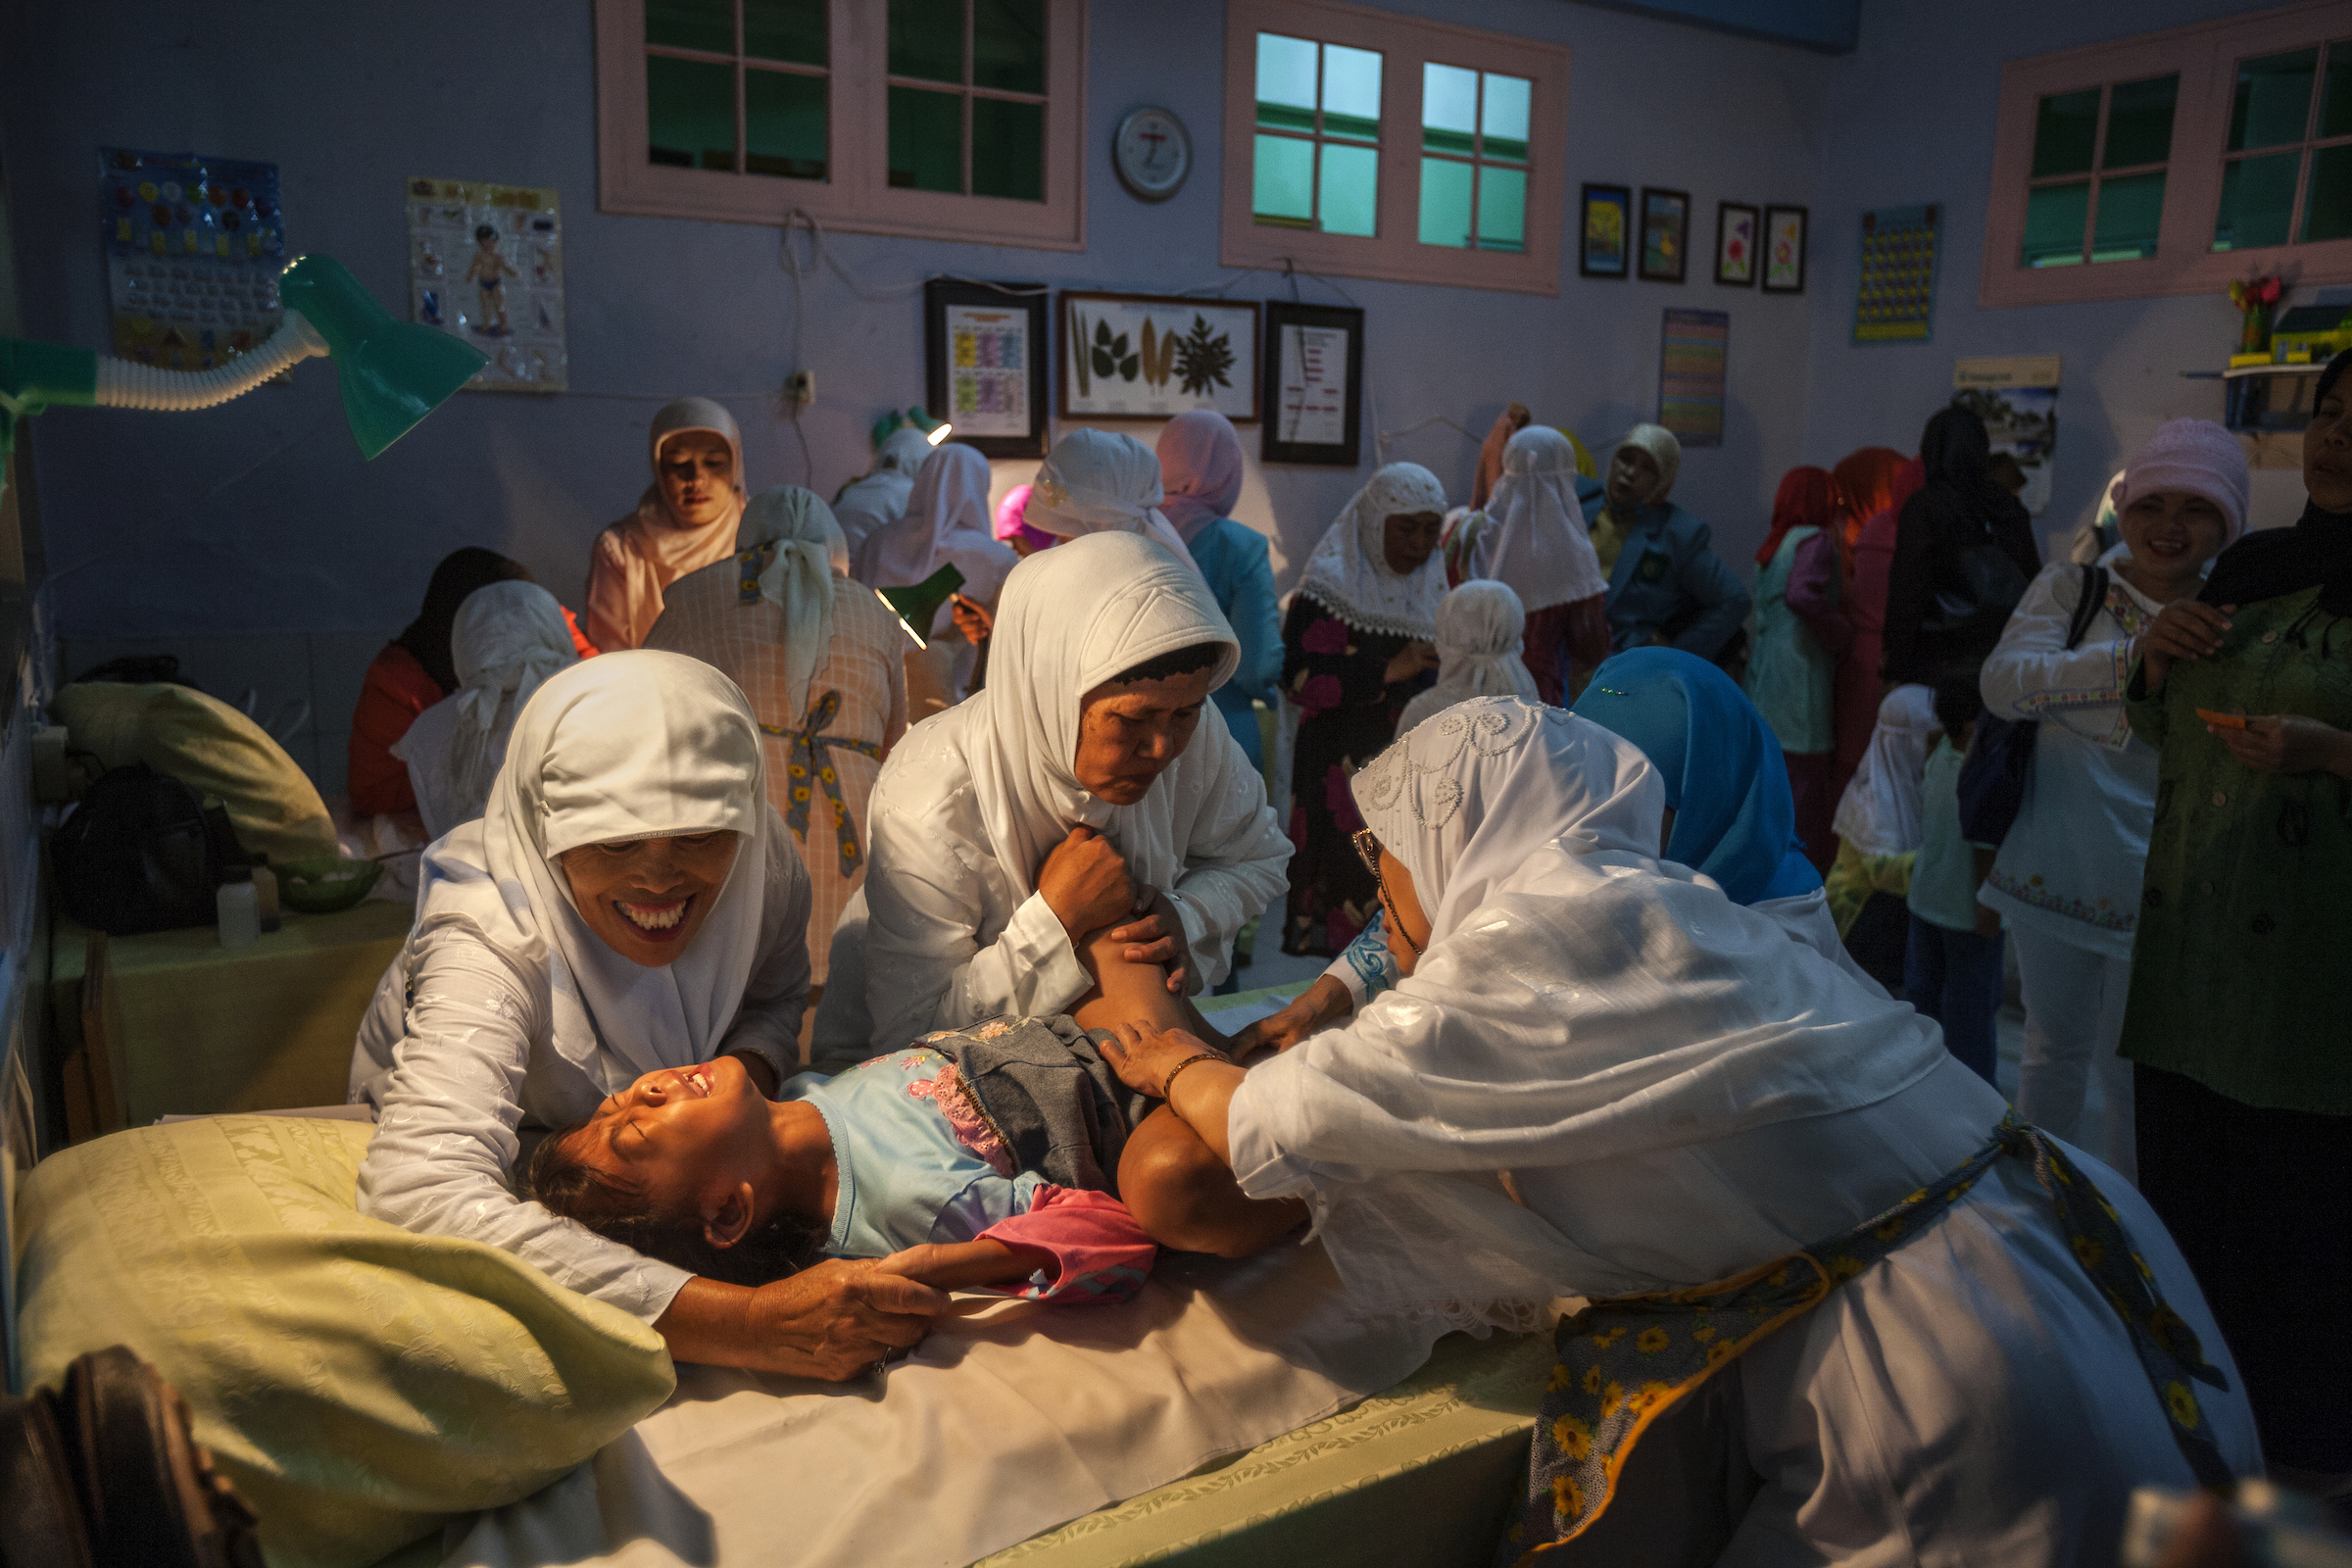 A young girl screams while being circumcised in Bandung, Indonesia.